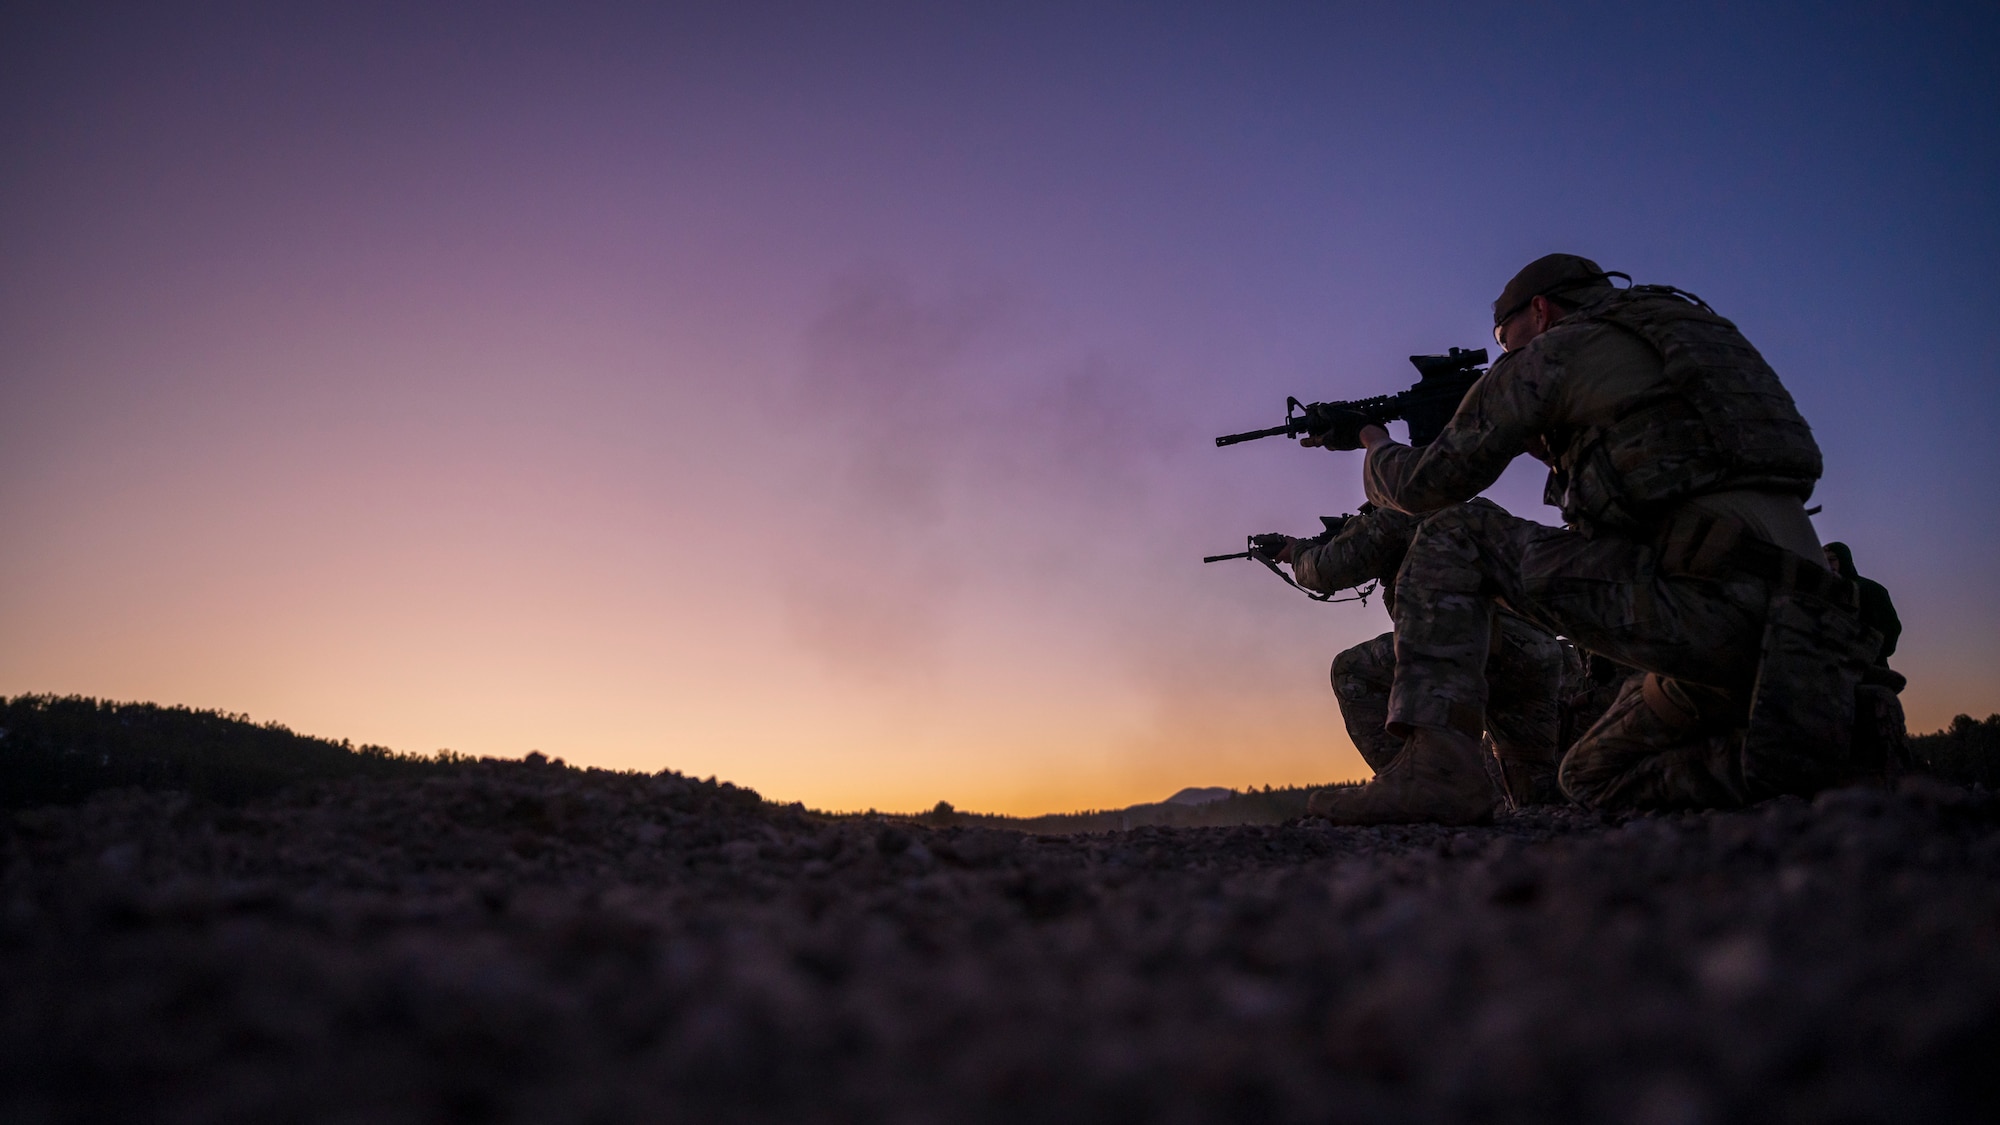 U.S. Air Force members assigned to the 56th Civil Engineer Squadron Explosive Ordnance Disposal flight fire M4 carbine assault rifles on a firing range at Camp Navajo, Arizona, April 10, 2023.